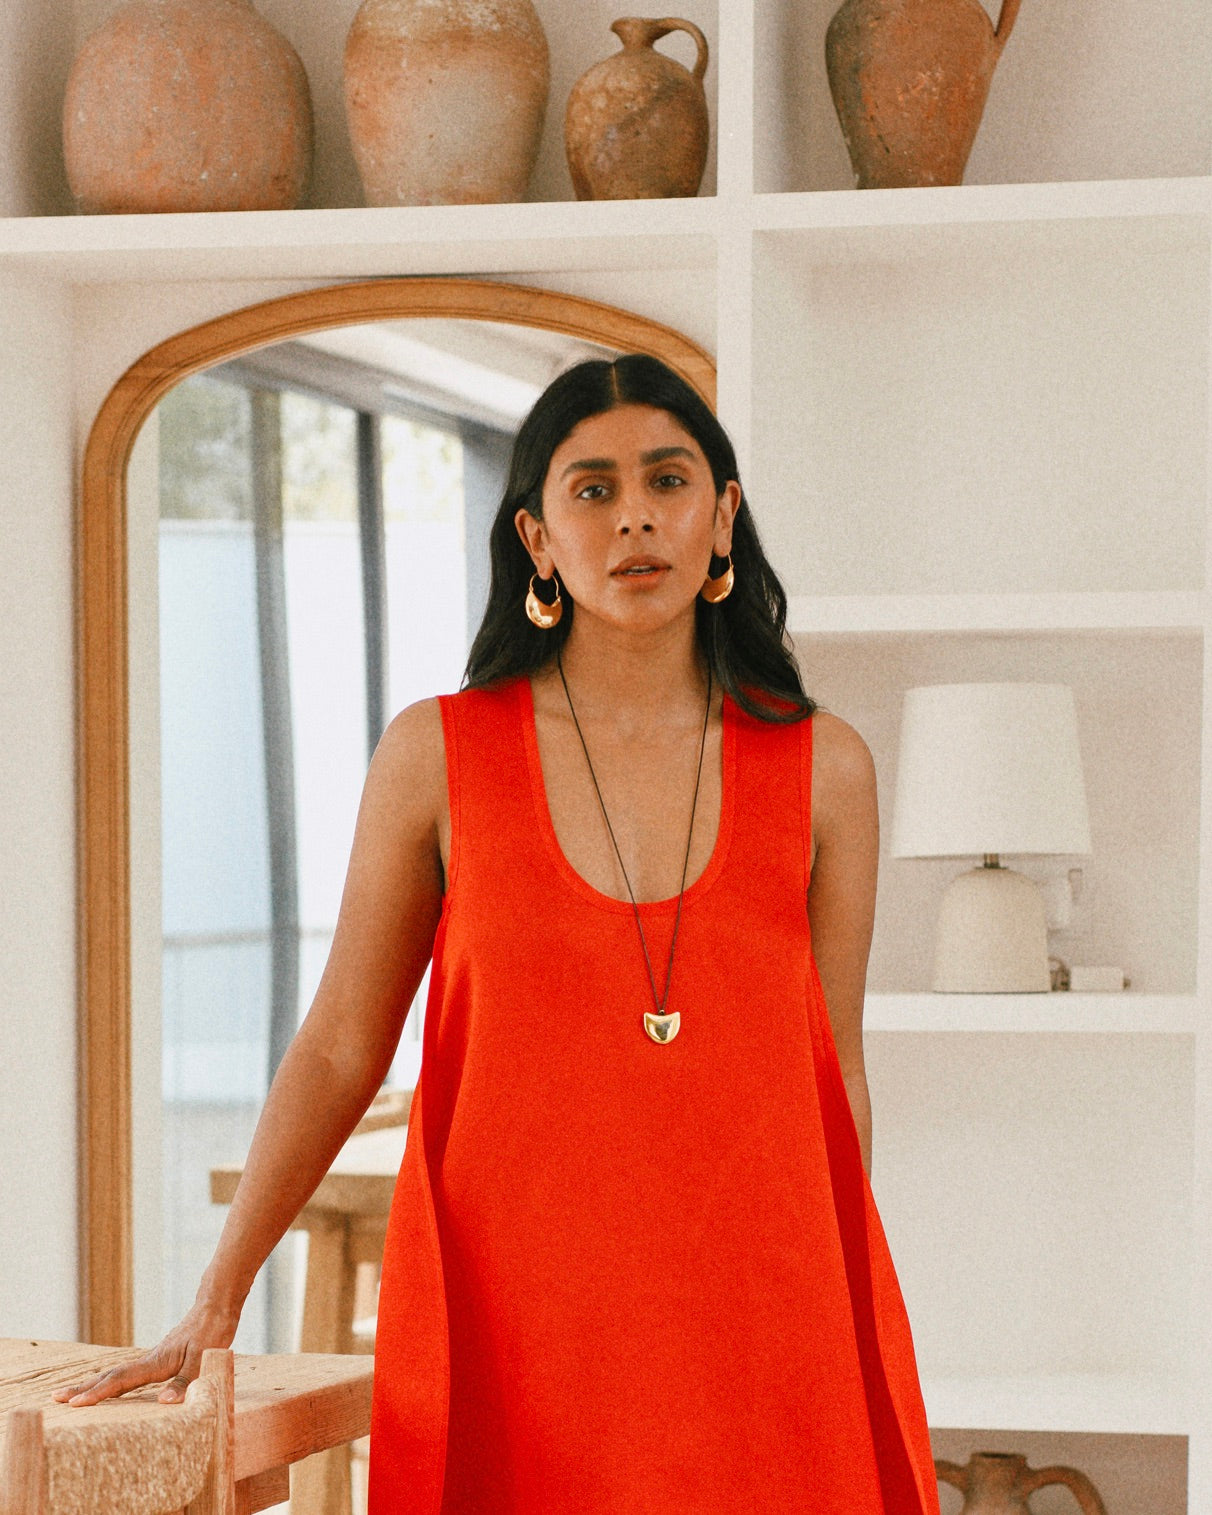 Monikh Dale x Daphine Vol. II. Monikh wears the Rochelle Gold Plated Earrings and Singh Gold Plated Pendant Necklace.